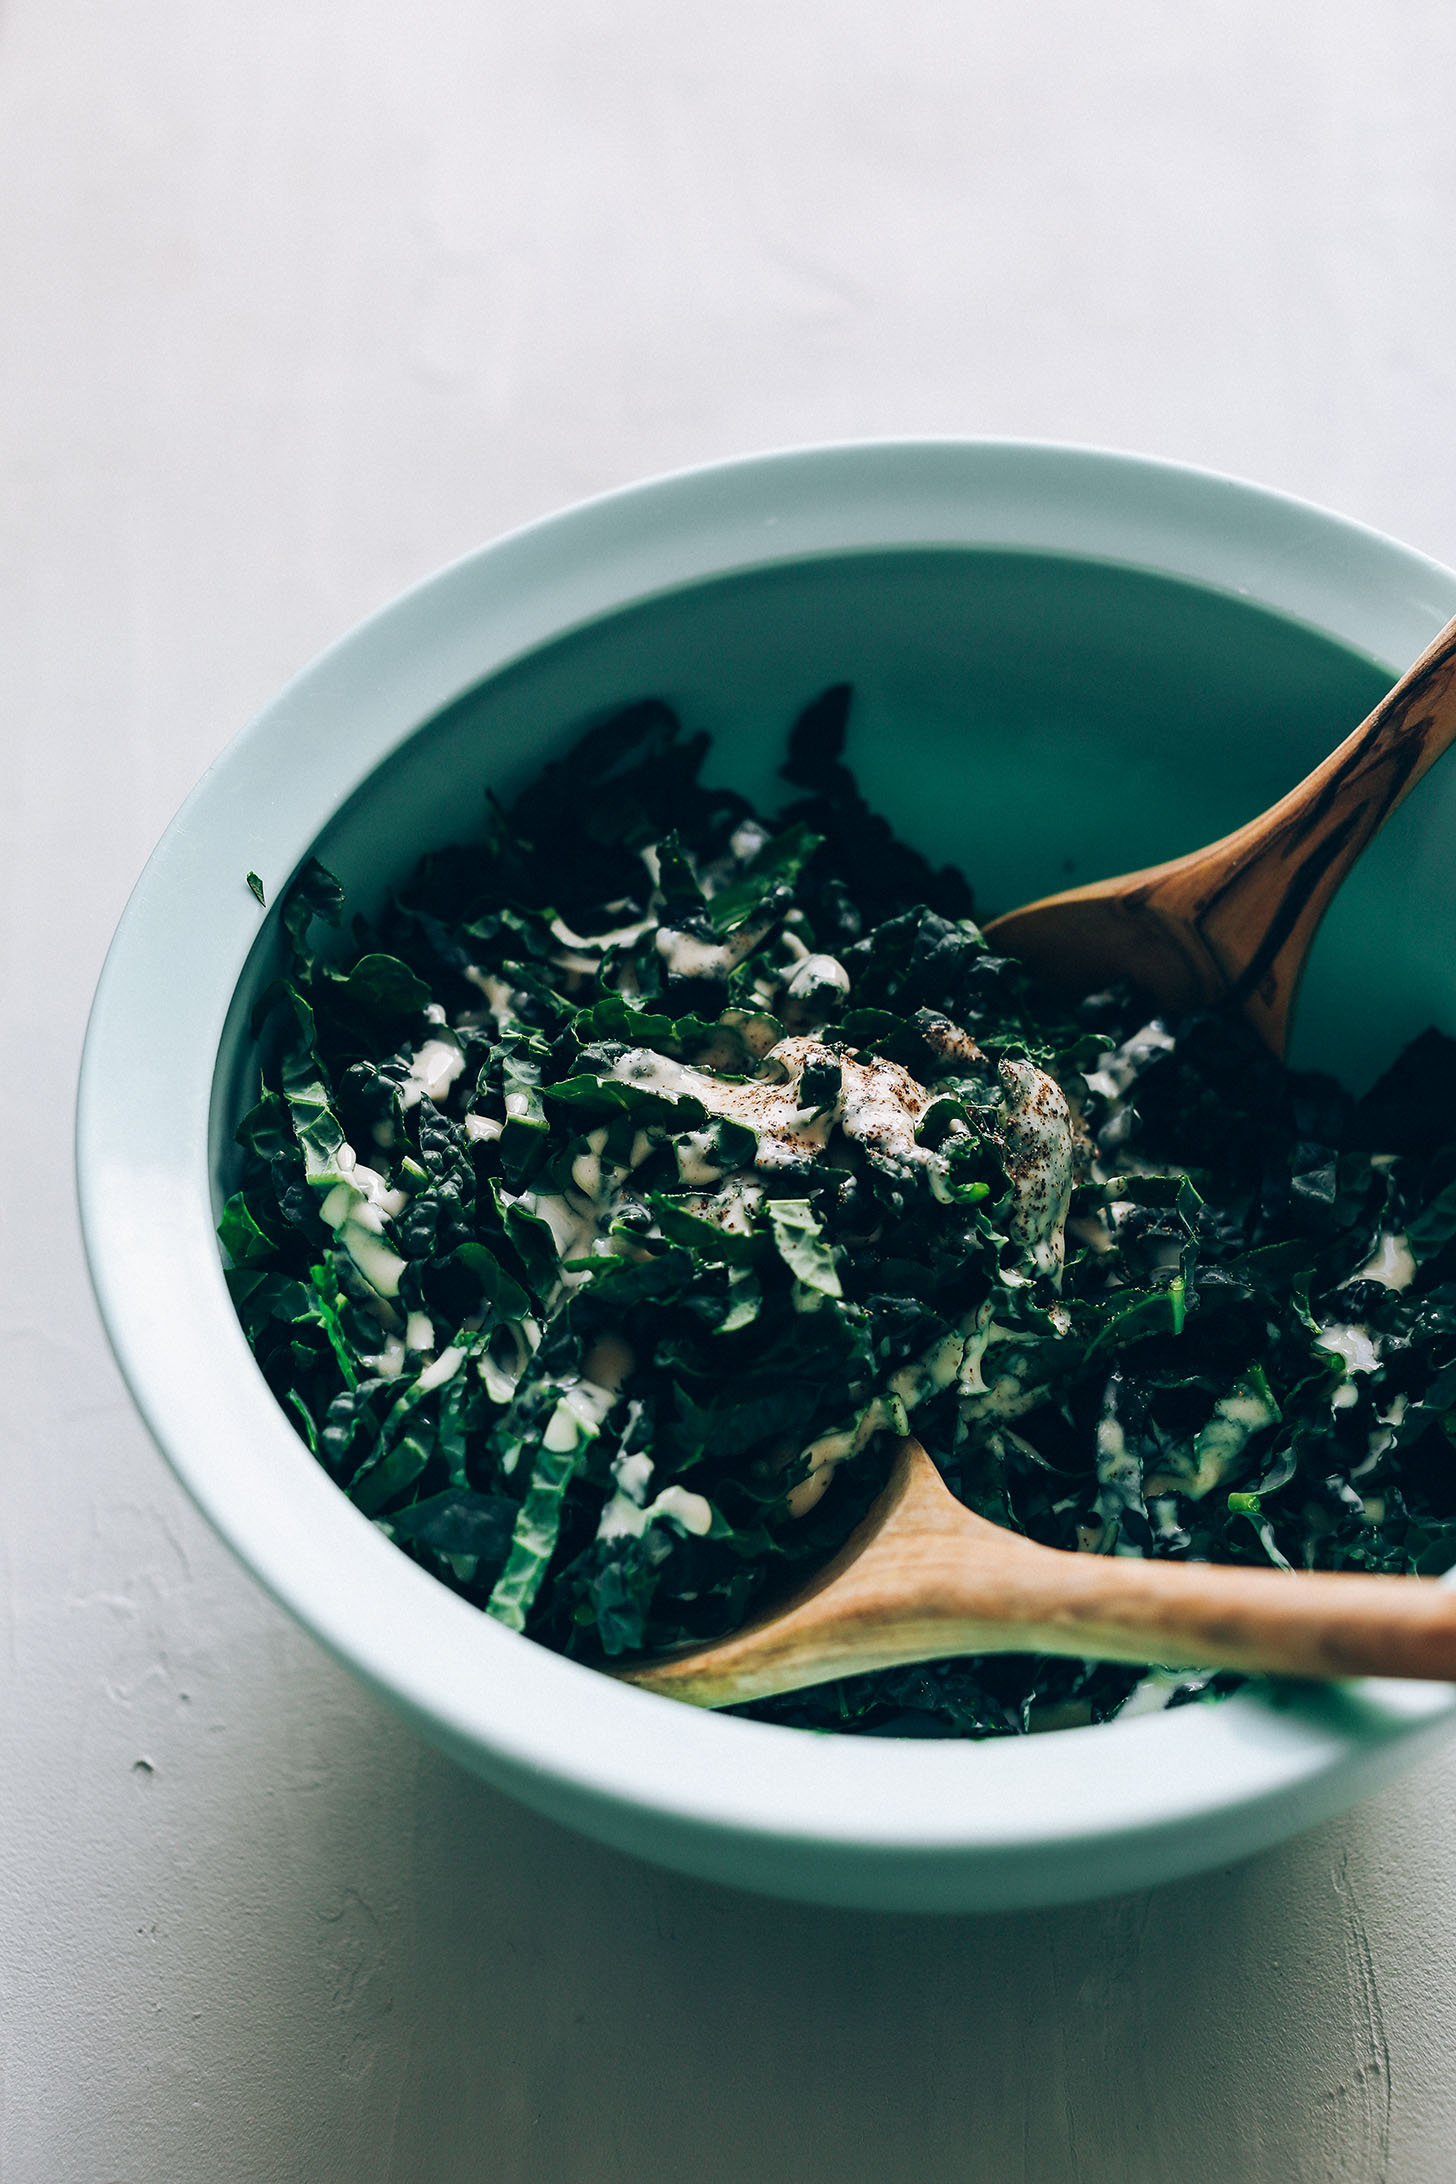 Using wooden spoons to toss shredded kale with tahini dressing